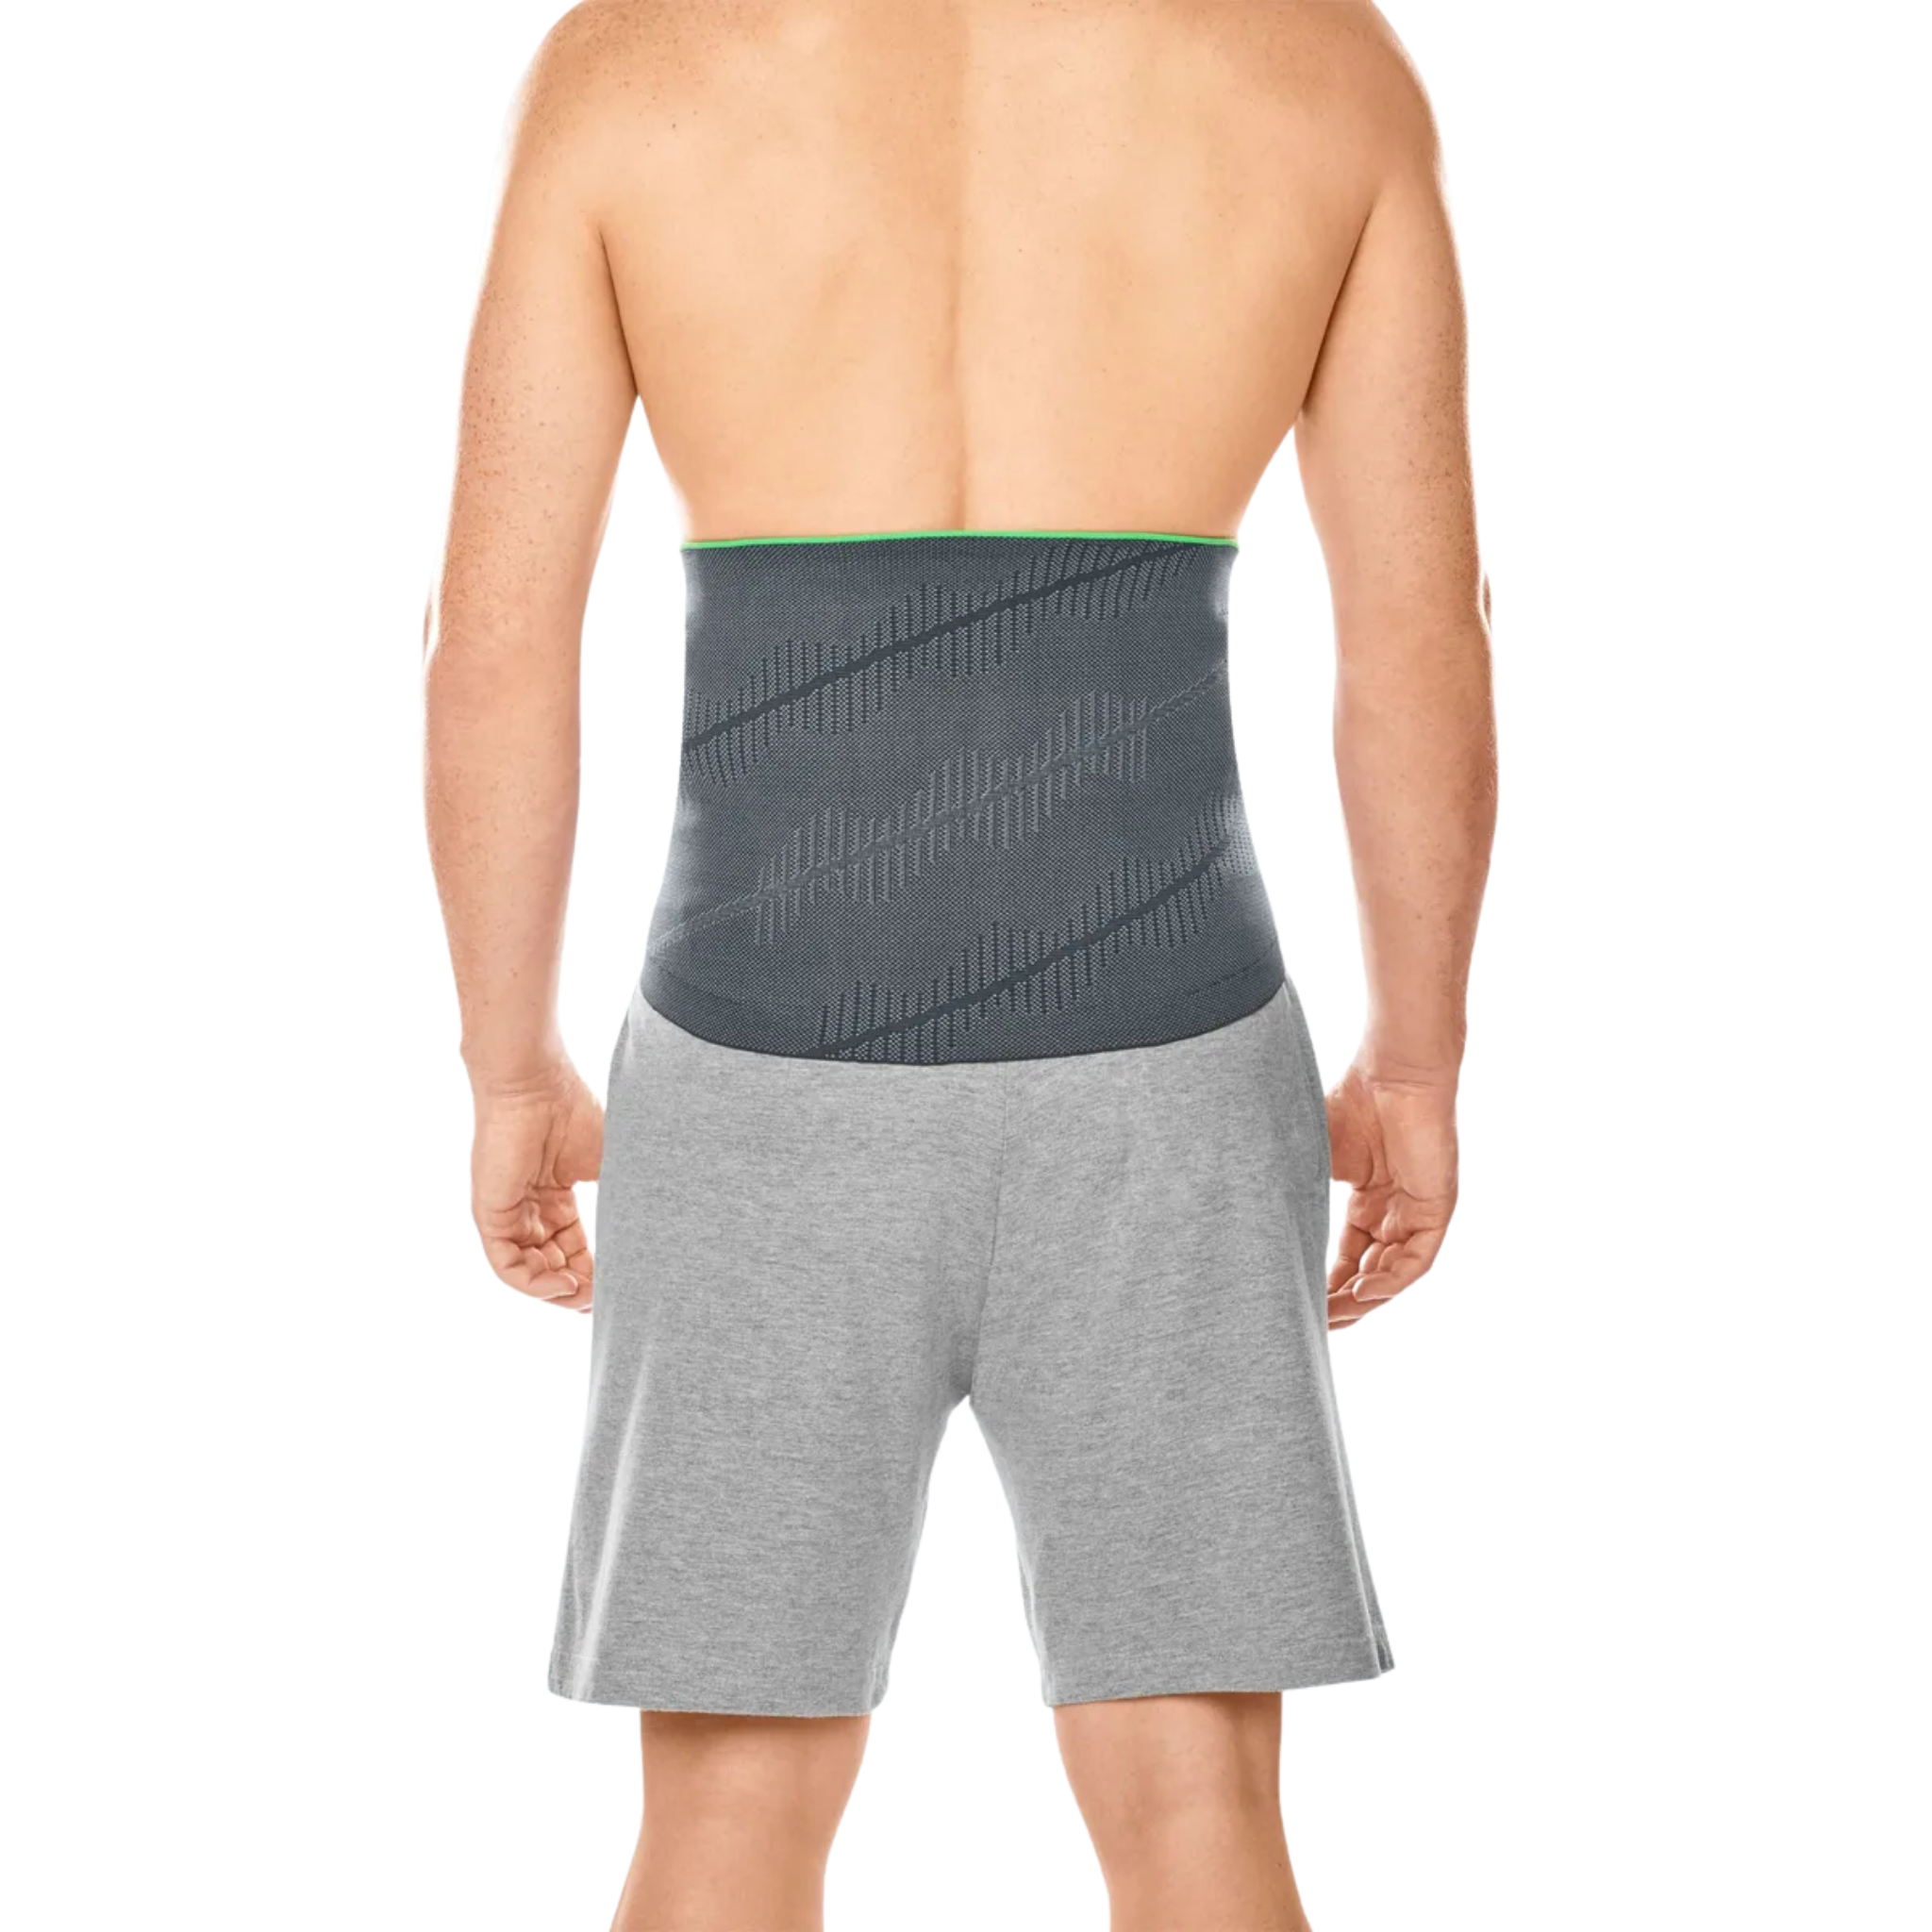 Lumbar Support for Stabilisation  protect.Lumbaforte